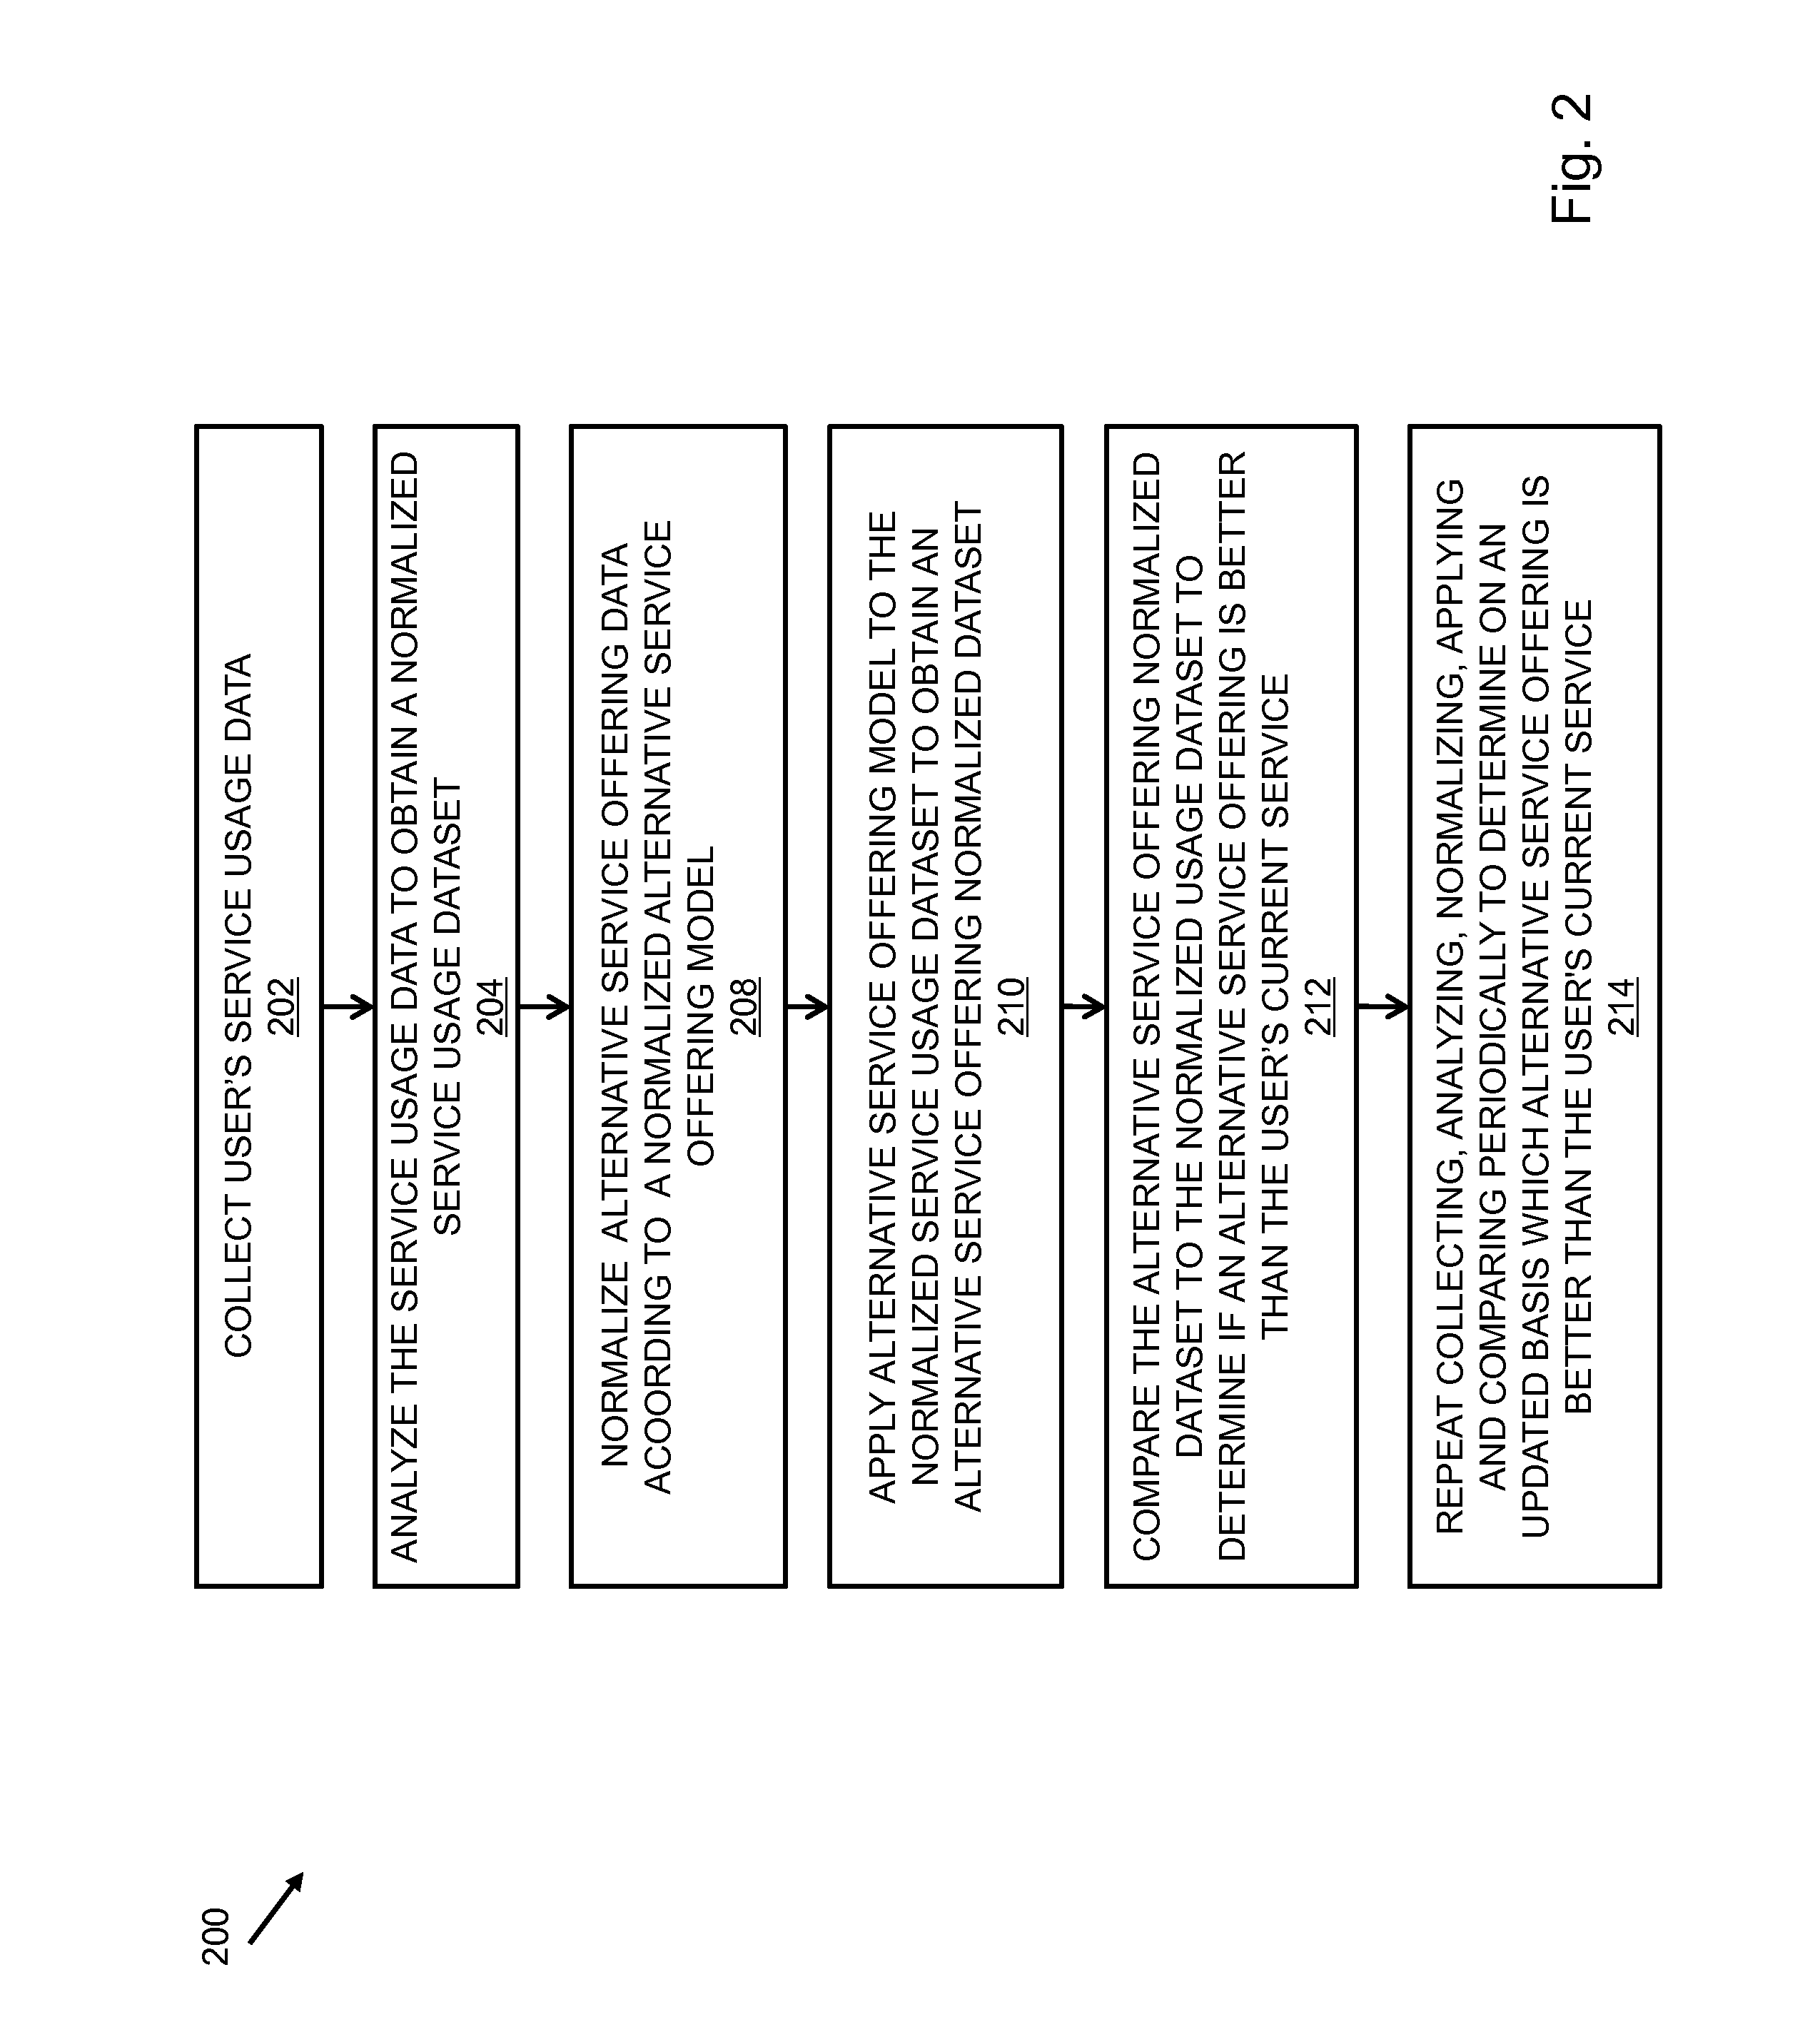 System and method for managing savings opportunities